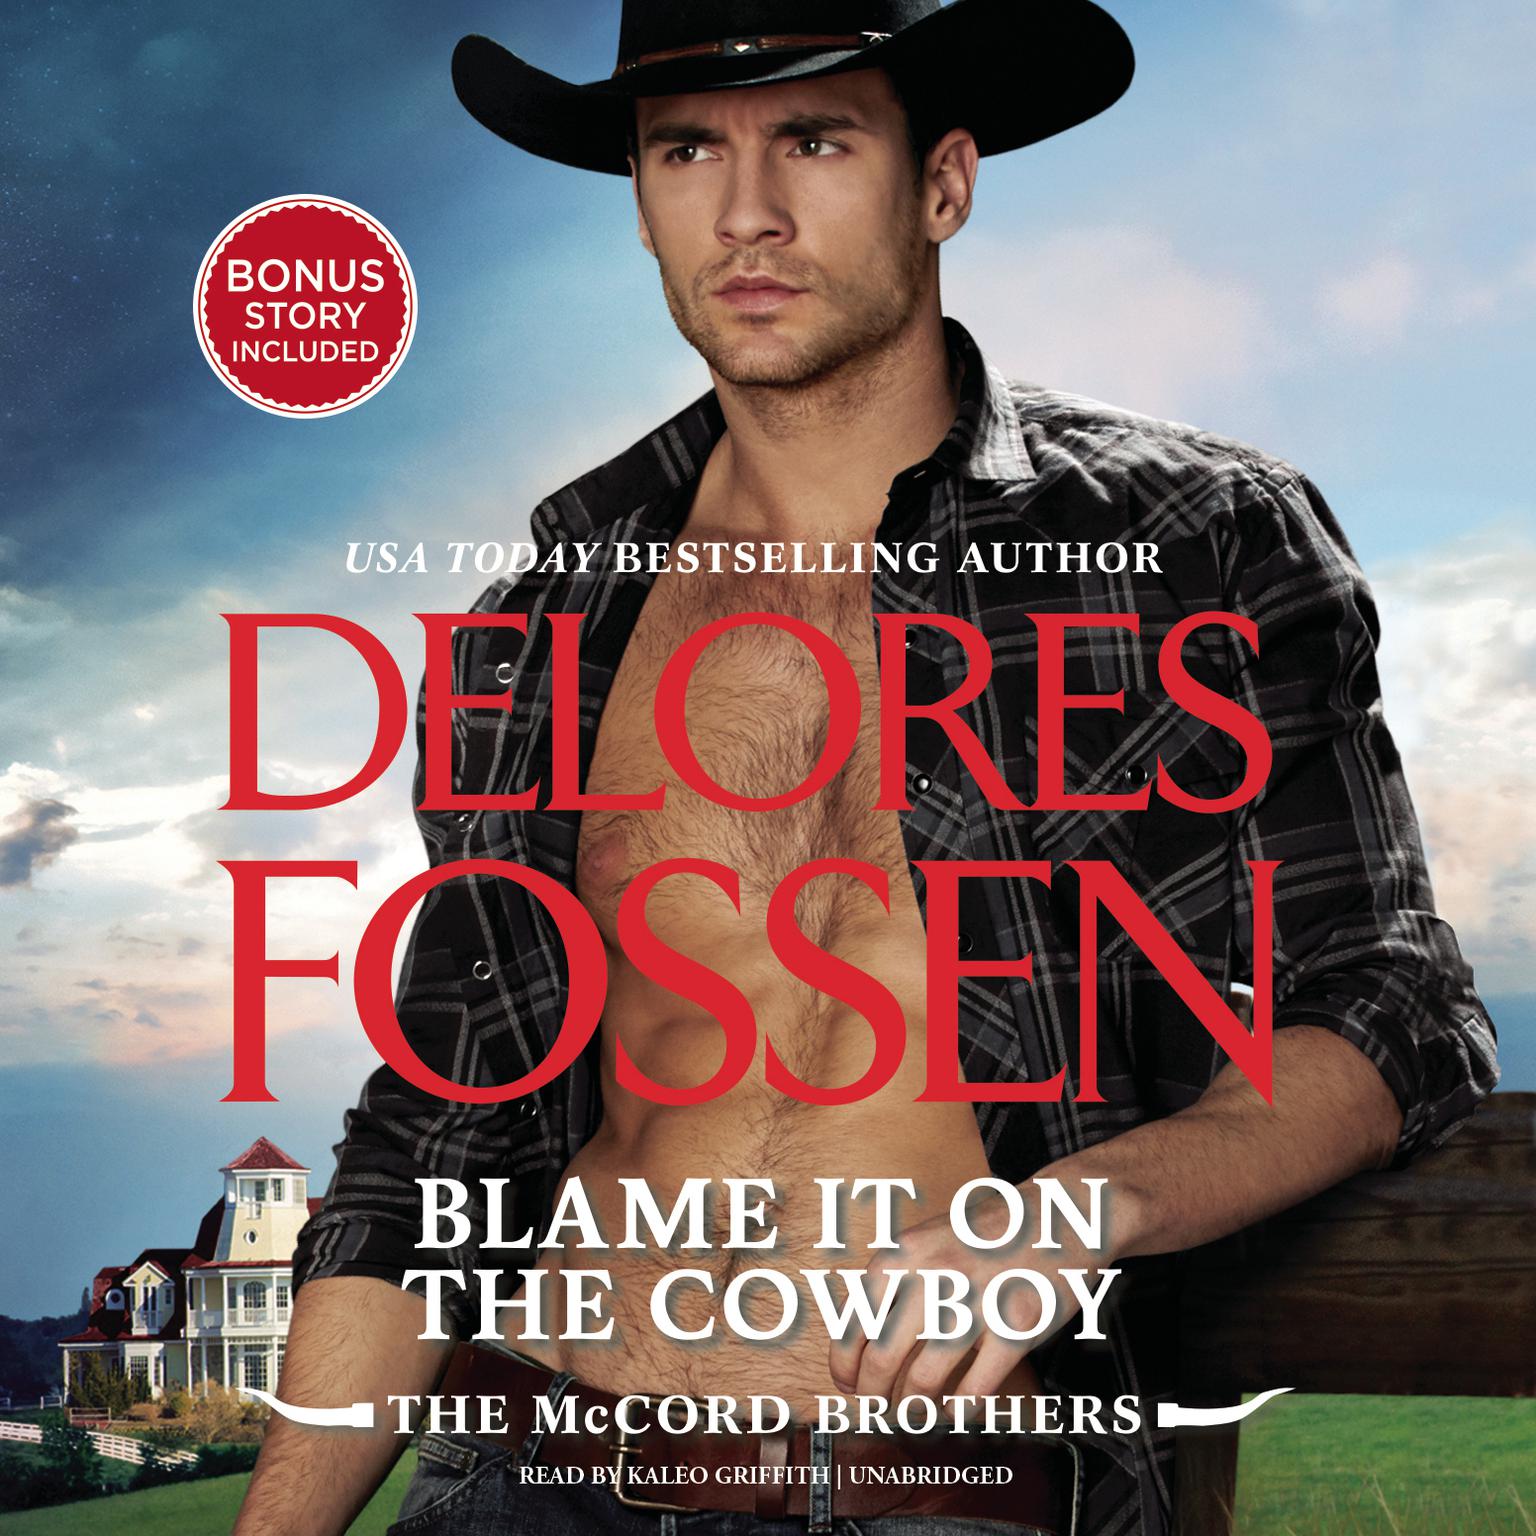 Blame It on the Cowboy: The McCord Brothers, #3 Audiobook, by Delores Fossen